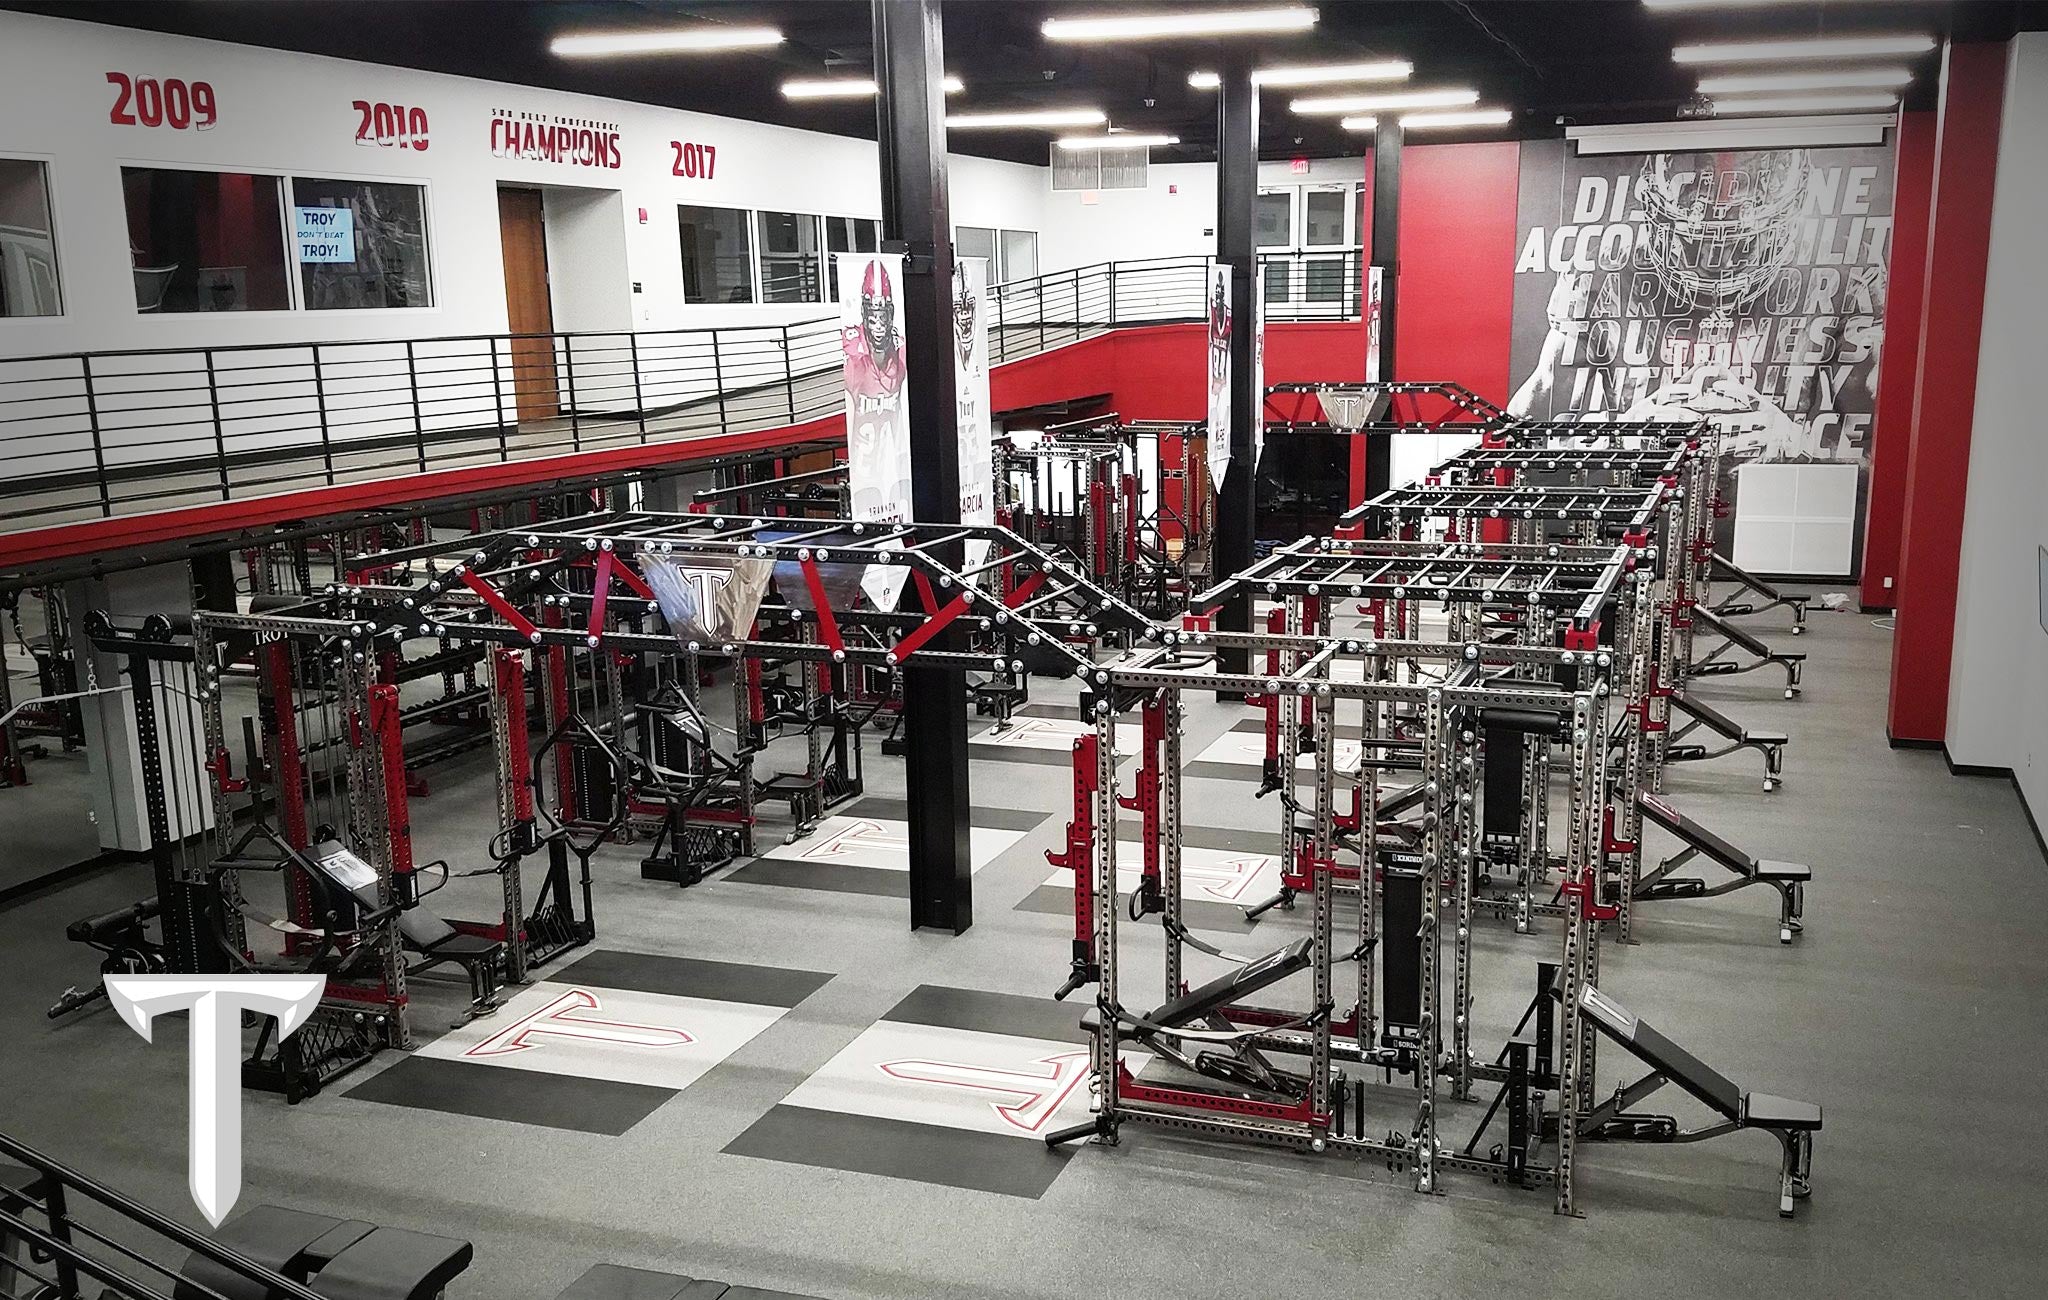 Troy University Sorinex strength and conditioning facility